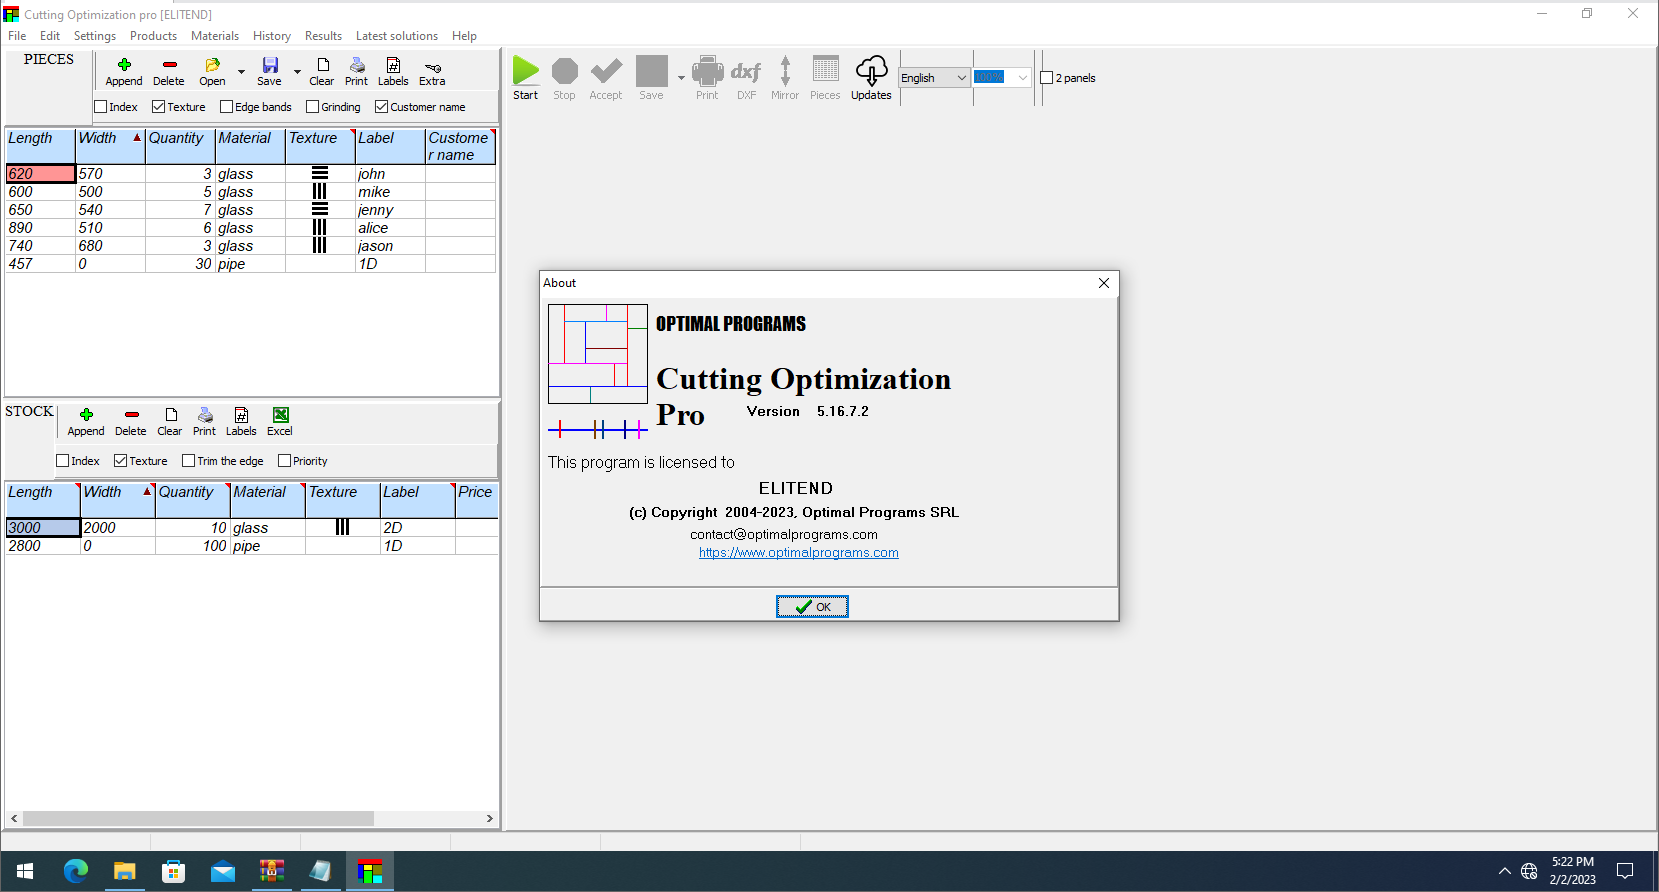 Working with Cutting Optimization Pro 5.16.7.2 full